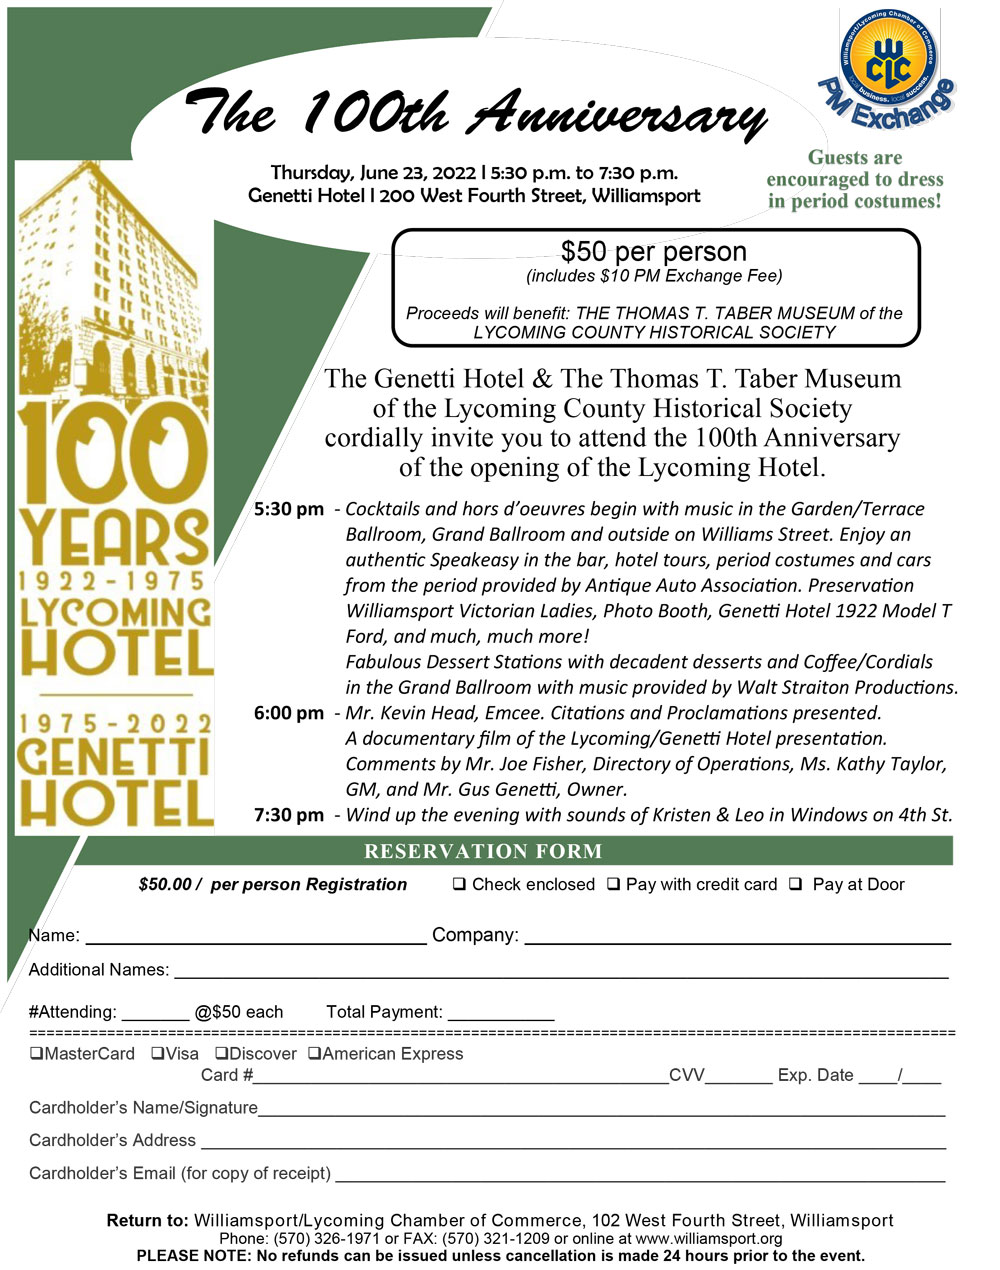 100th Anniversary of the opening of the Lycoming Hotel